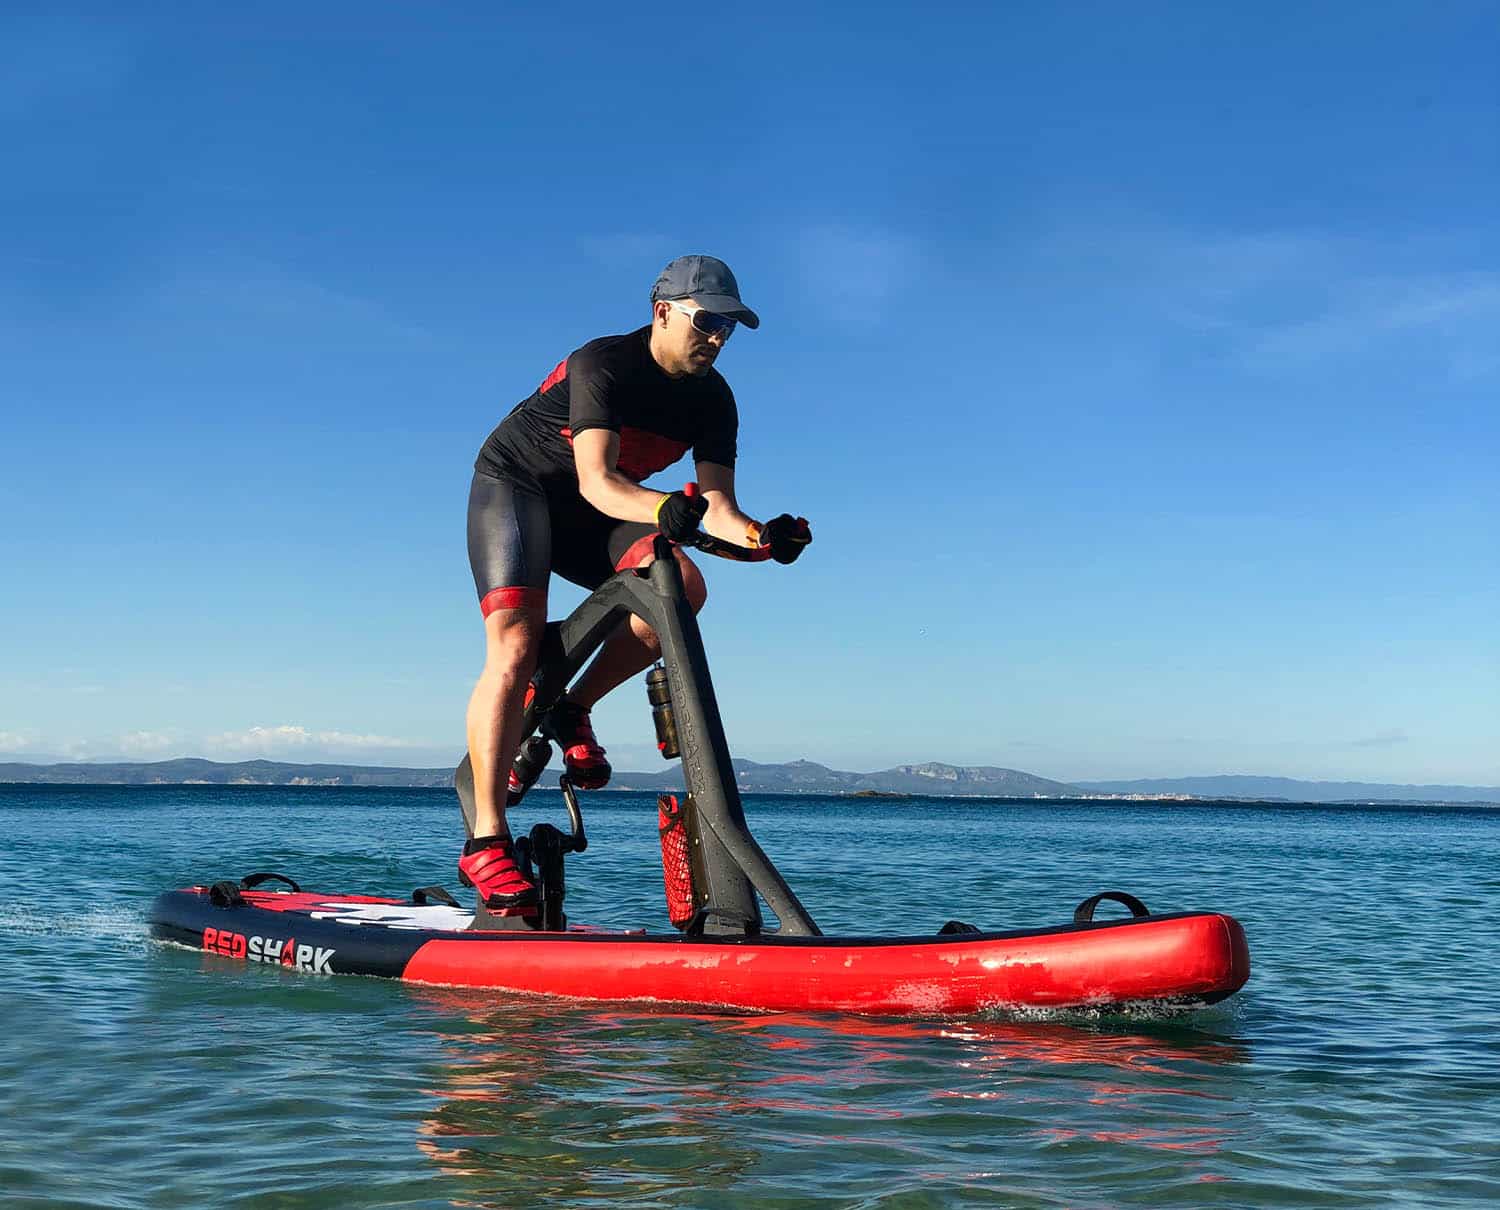 Red Shark Bikes Canada, fitness, paddleboard, spinning, eco-friendly, water bikes